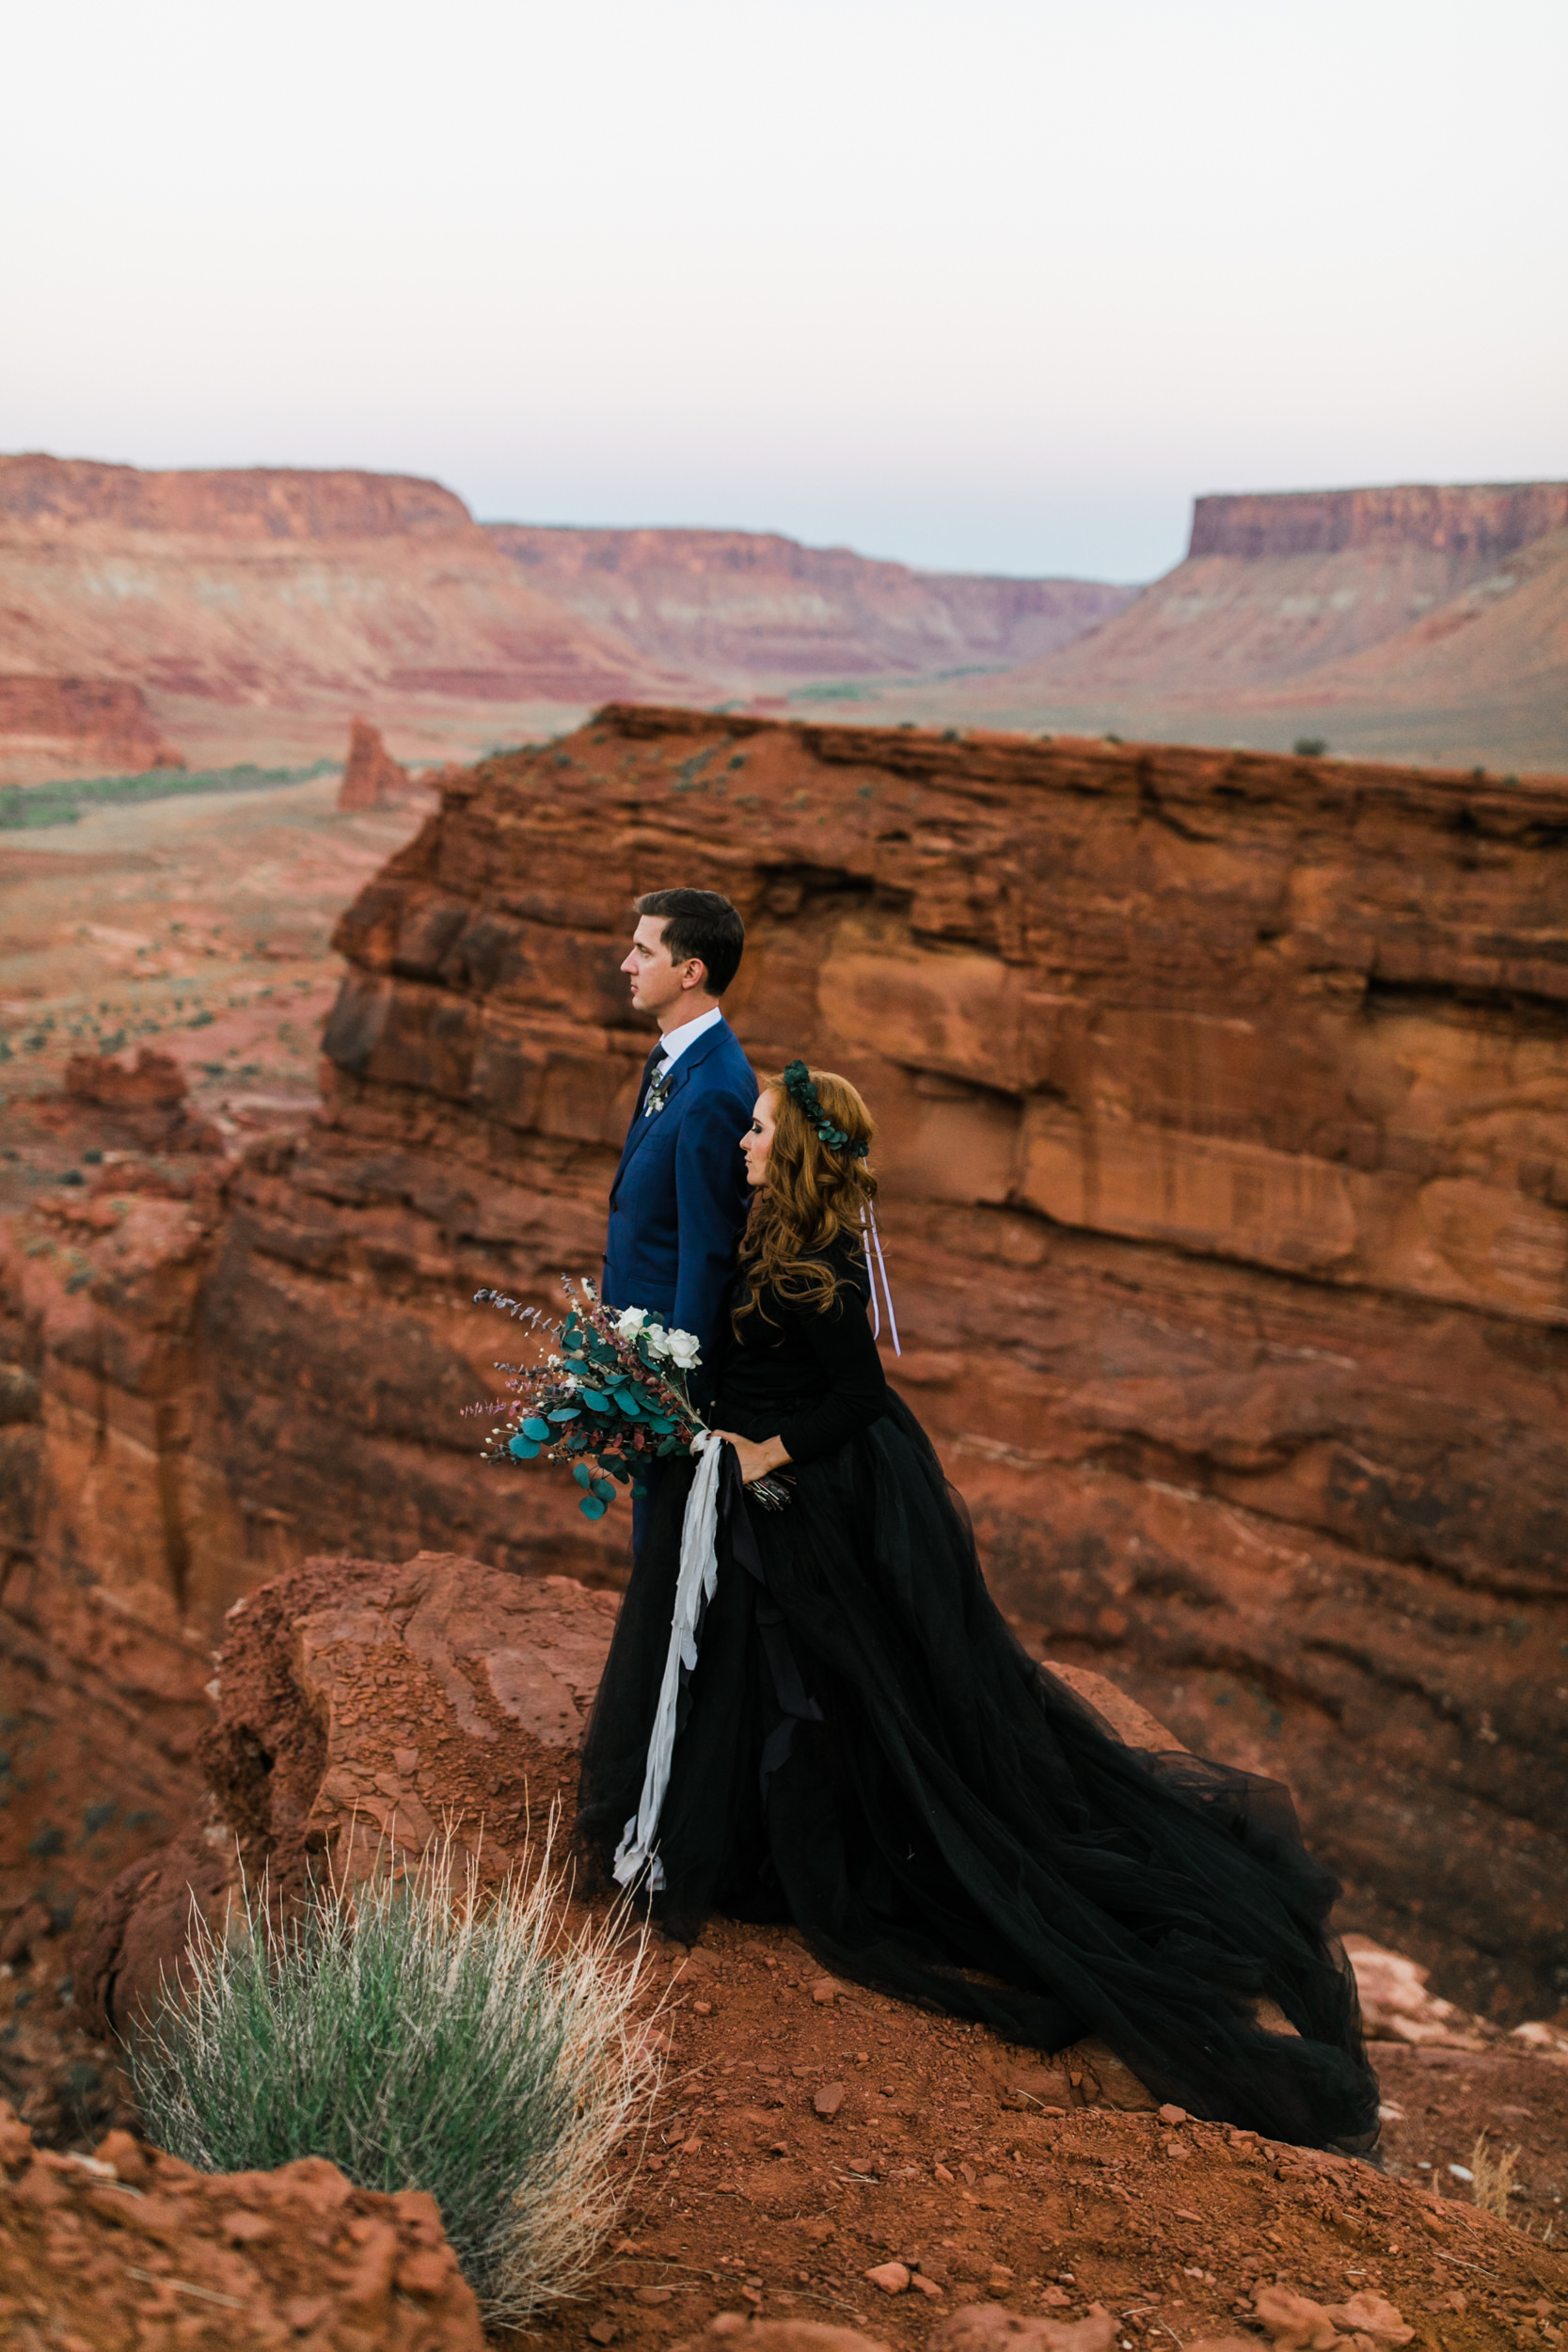 ben + rachelle's elopement in a secret canyon near Moab, Utah | canyonlands national park first look + portraits | secret ceremony on the edge of a cliff | moab adventure wedding photographer